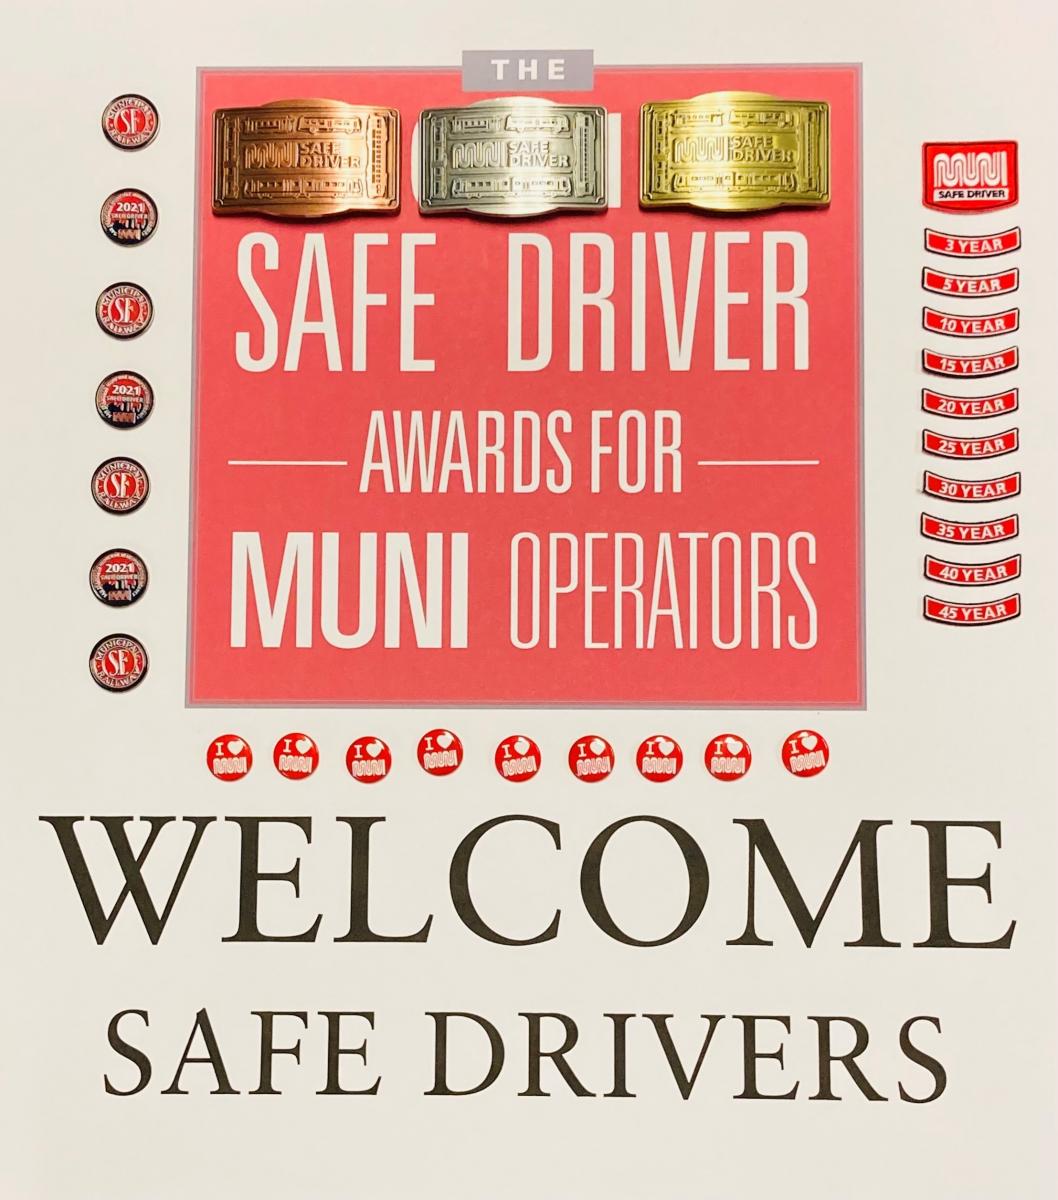 Safe Driver Awards 2021 token, belt buckles and patches 